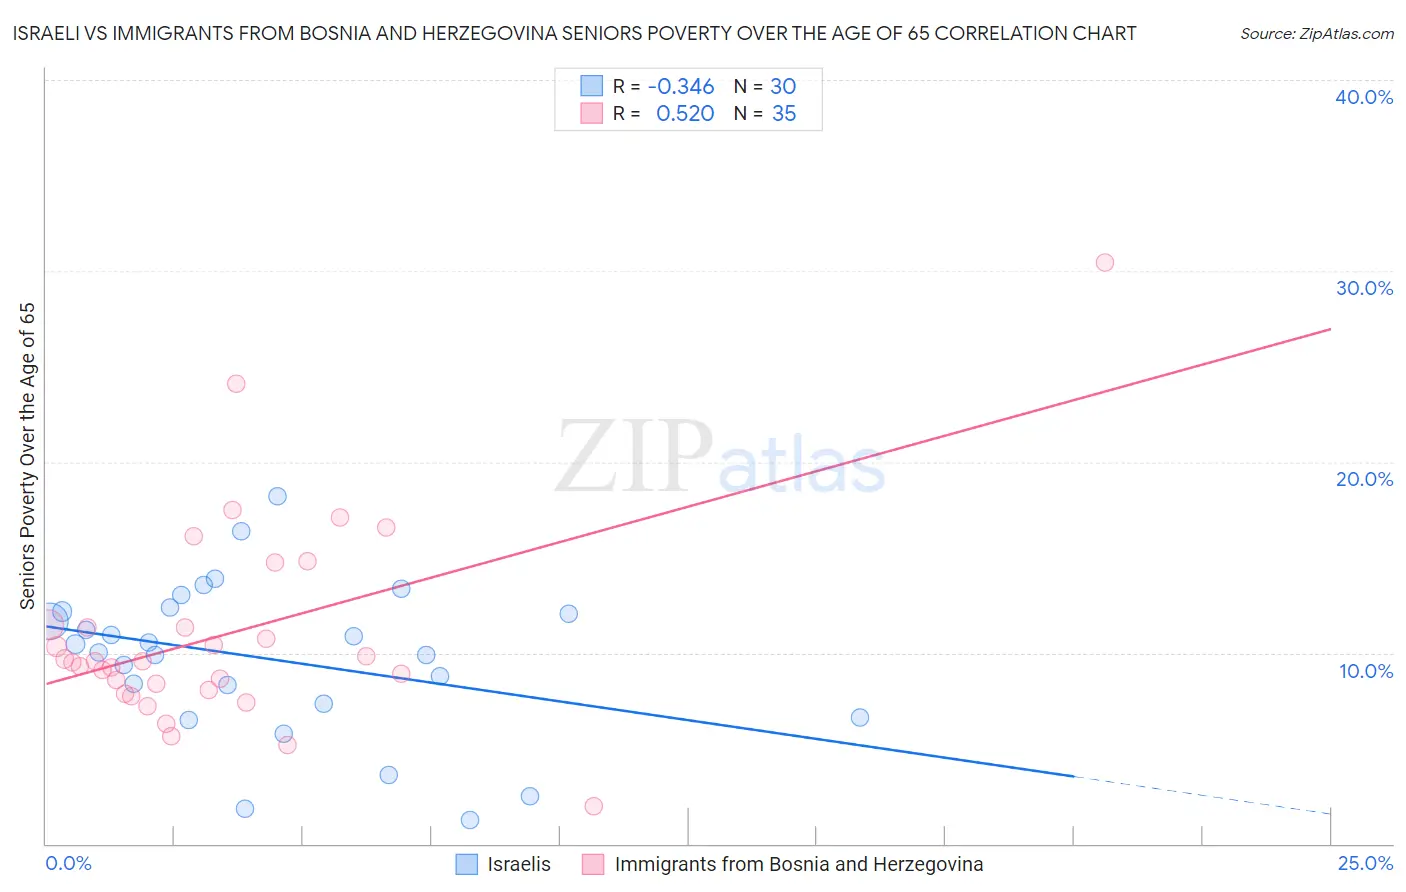 Israeli vs Immigrants from Bosnia and Herzegovina Seniors Poverty Over the Age of 65